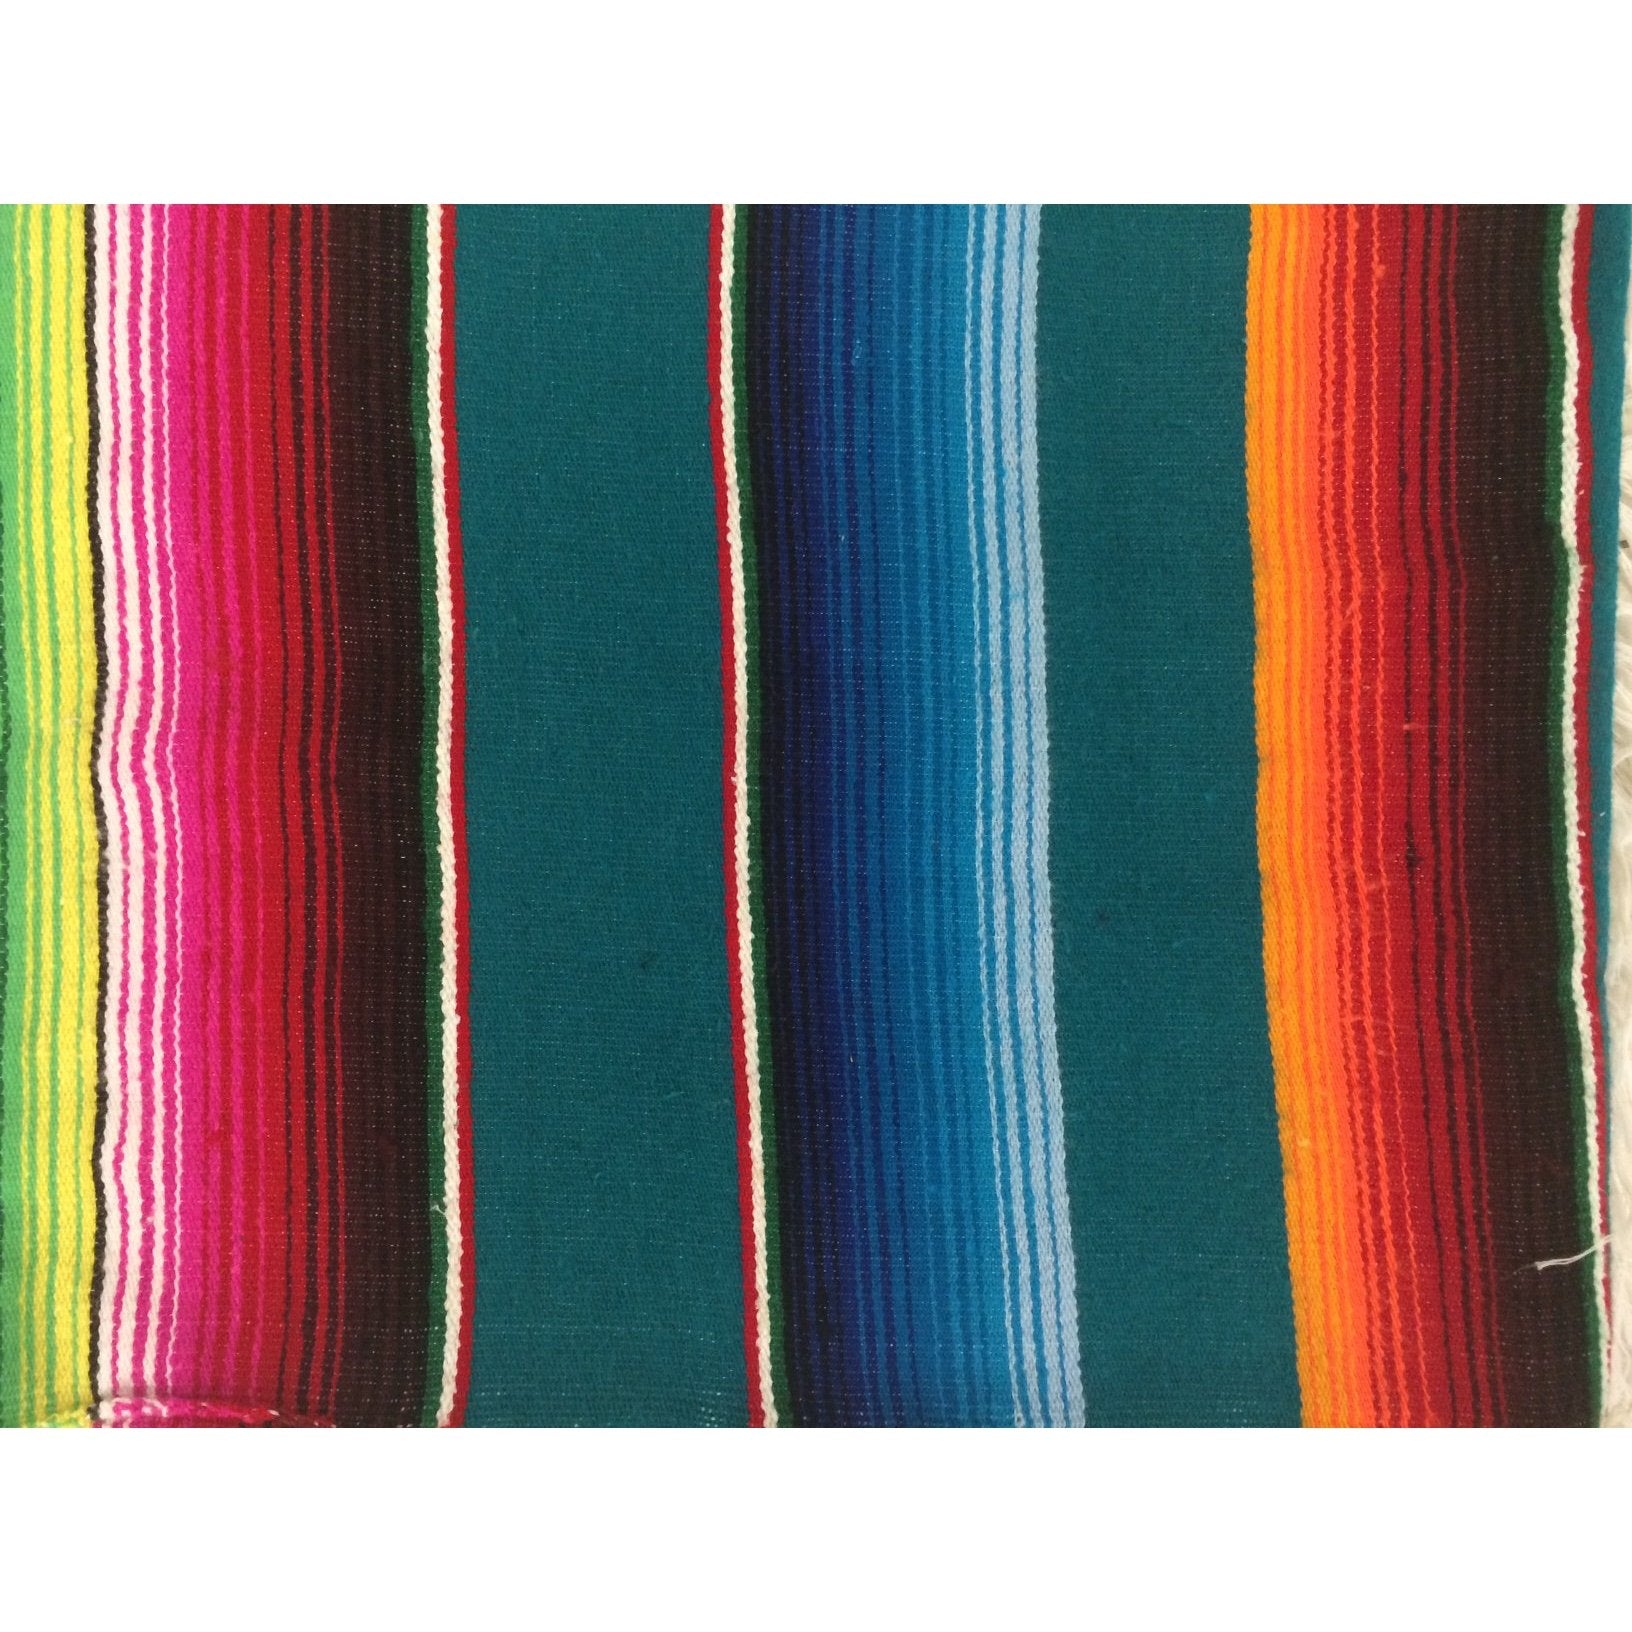 Emerald Green Mexican Sarape Blanket - Colours of Mexico